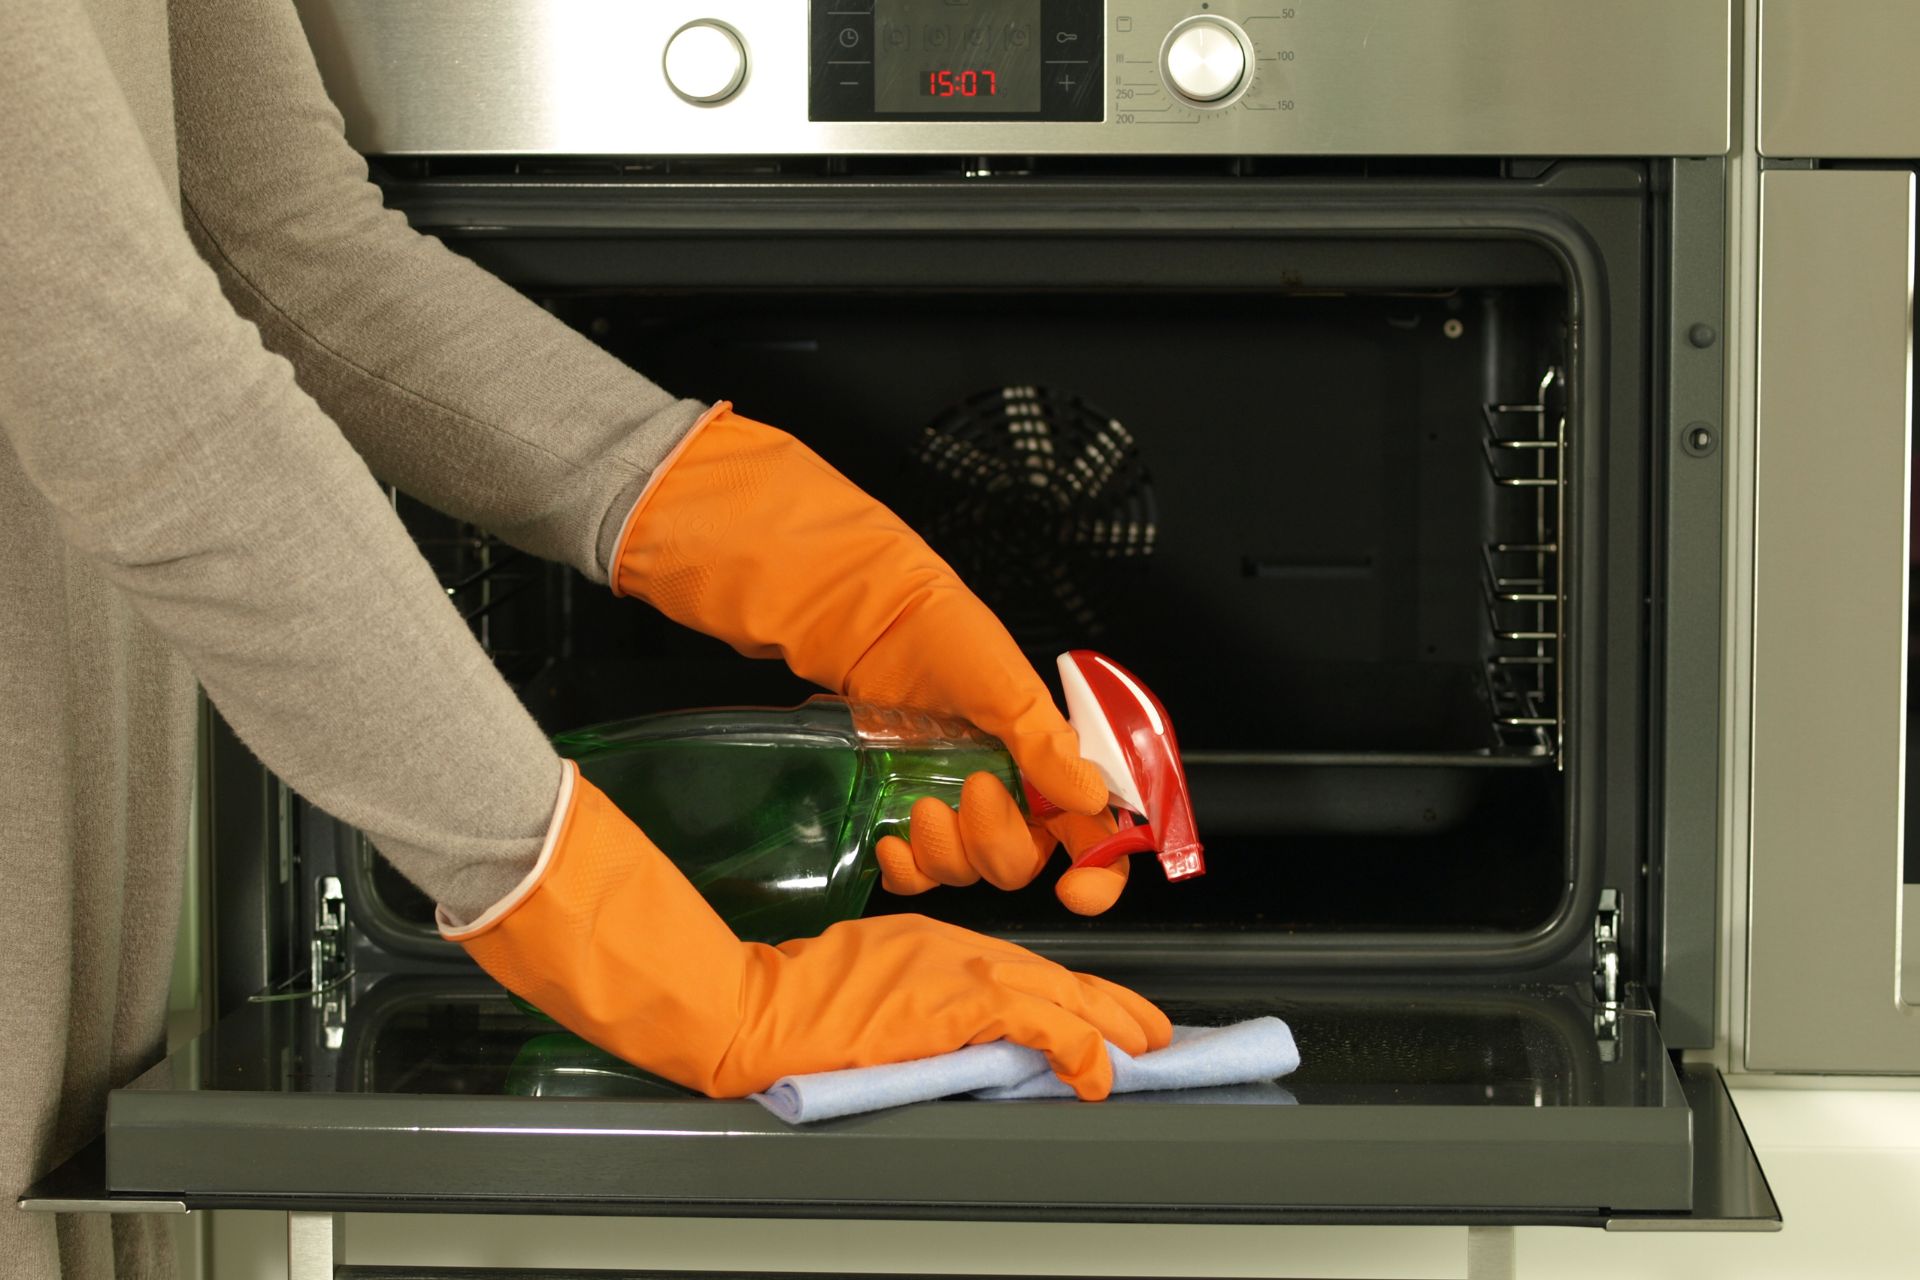 5 Oven Cleaning Hacks